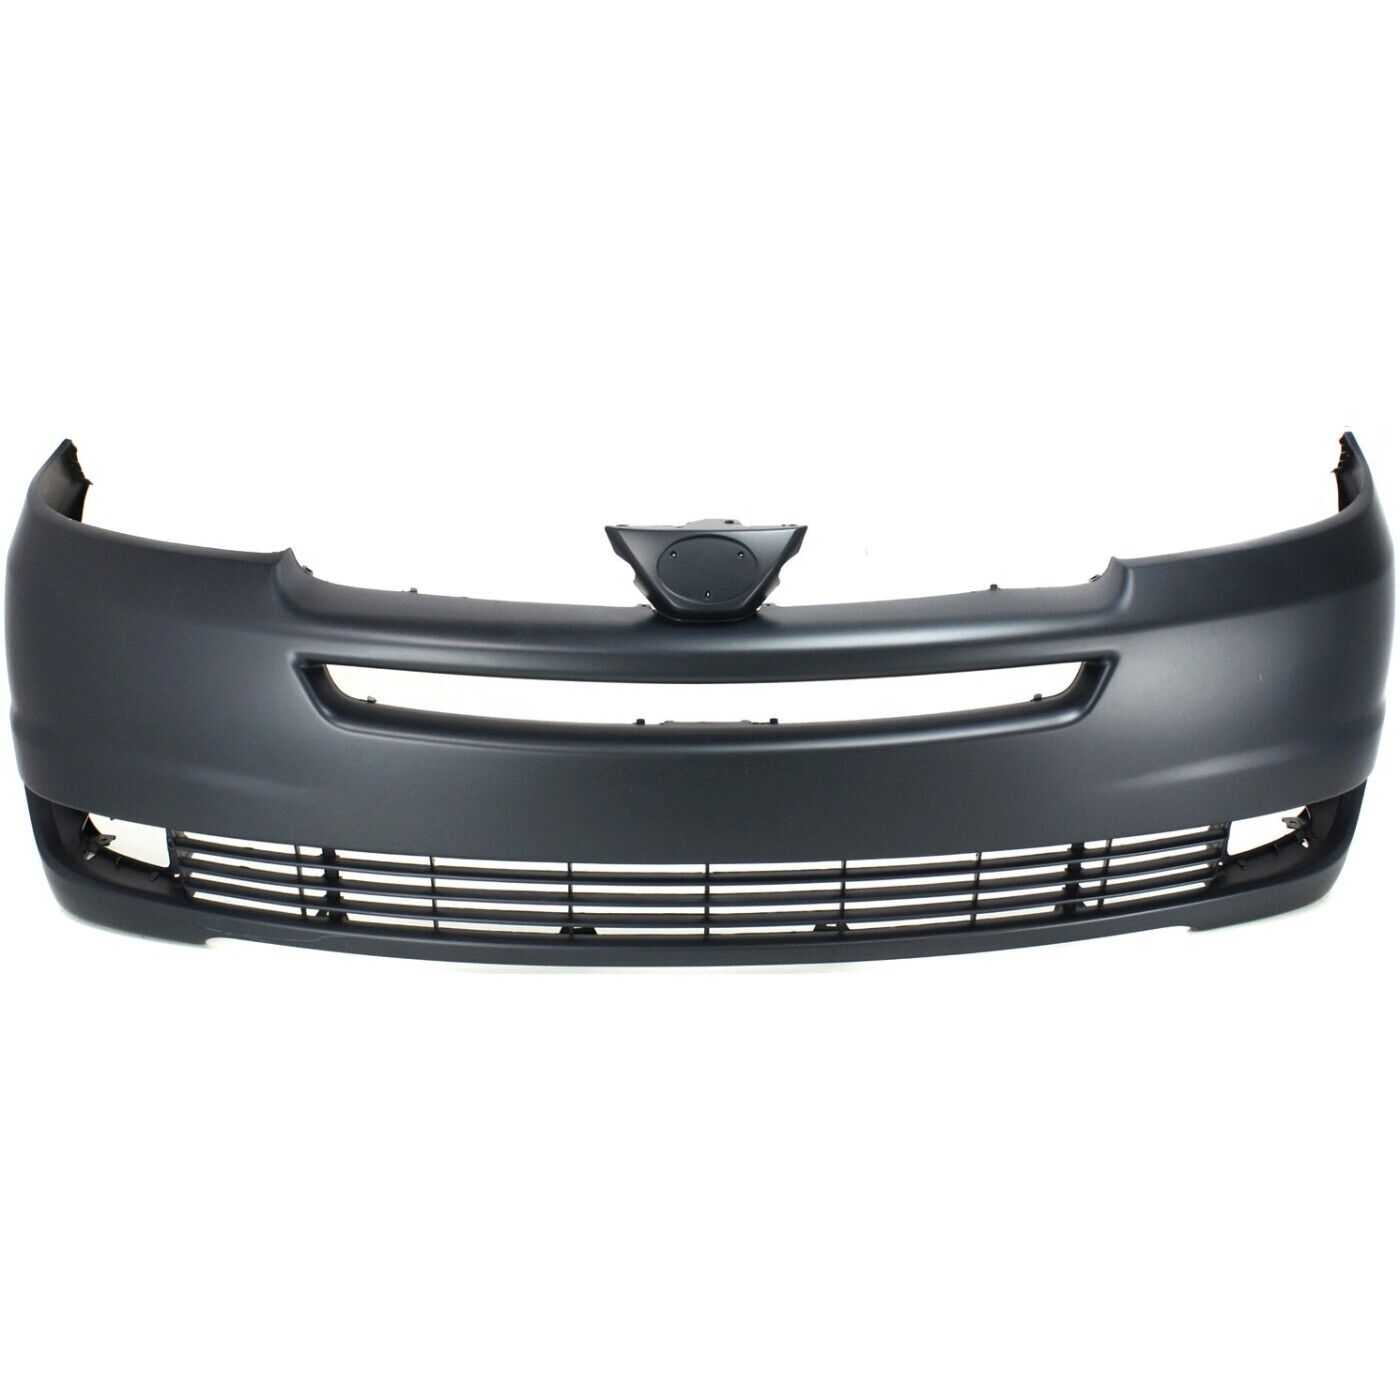 Front Bumper Cover For 2004-2005 Toyota Sienna w/ fog lamp holes Primed